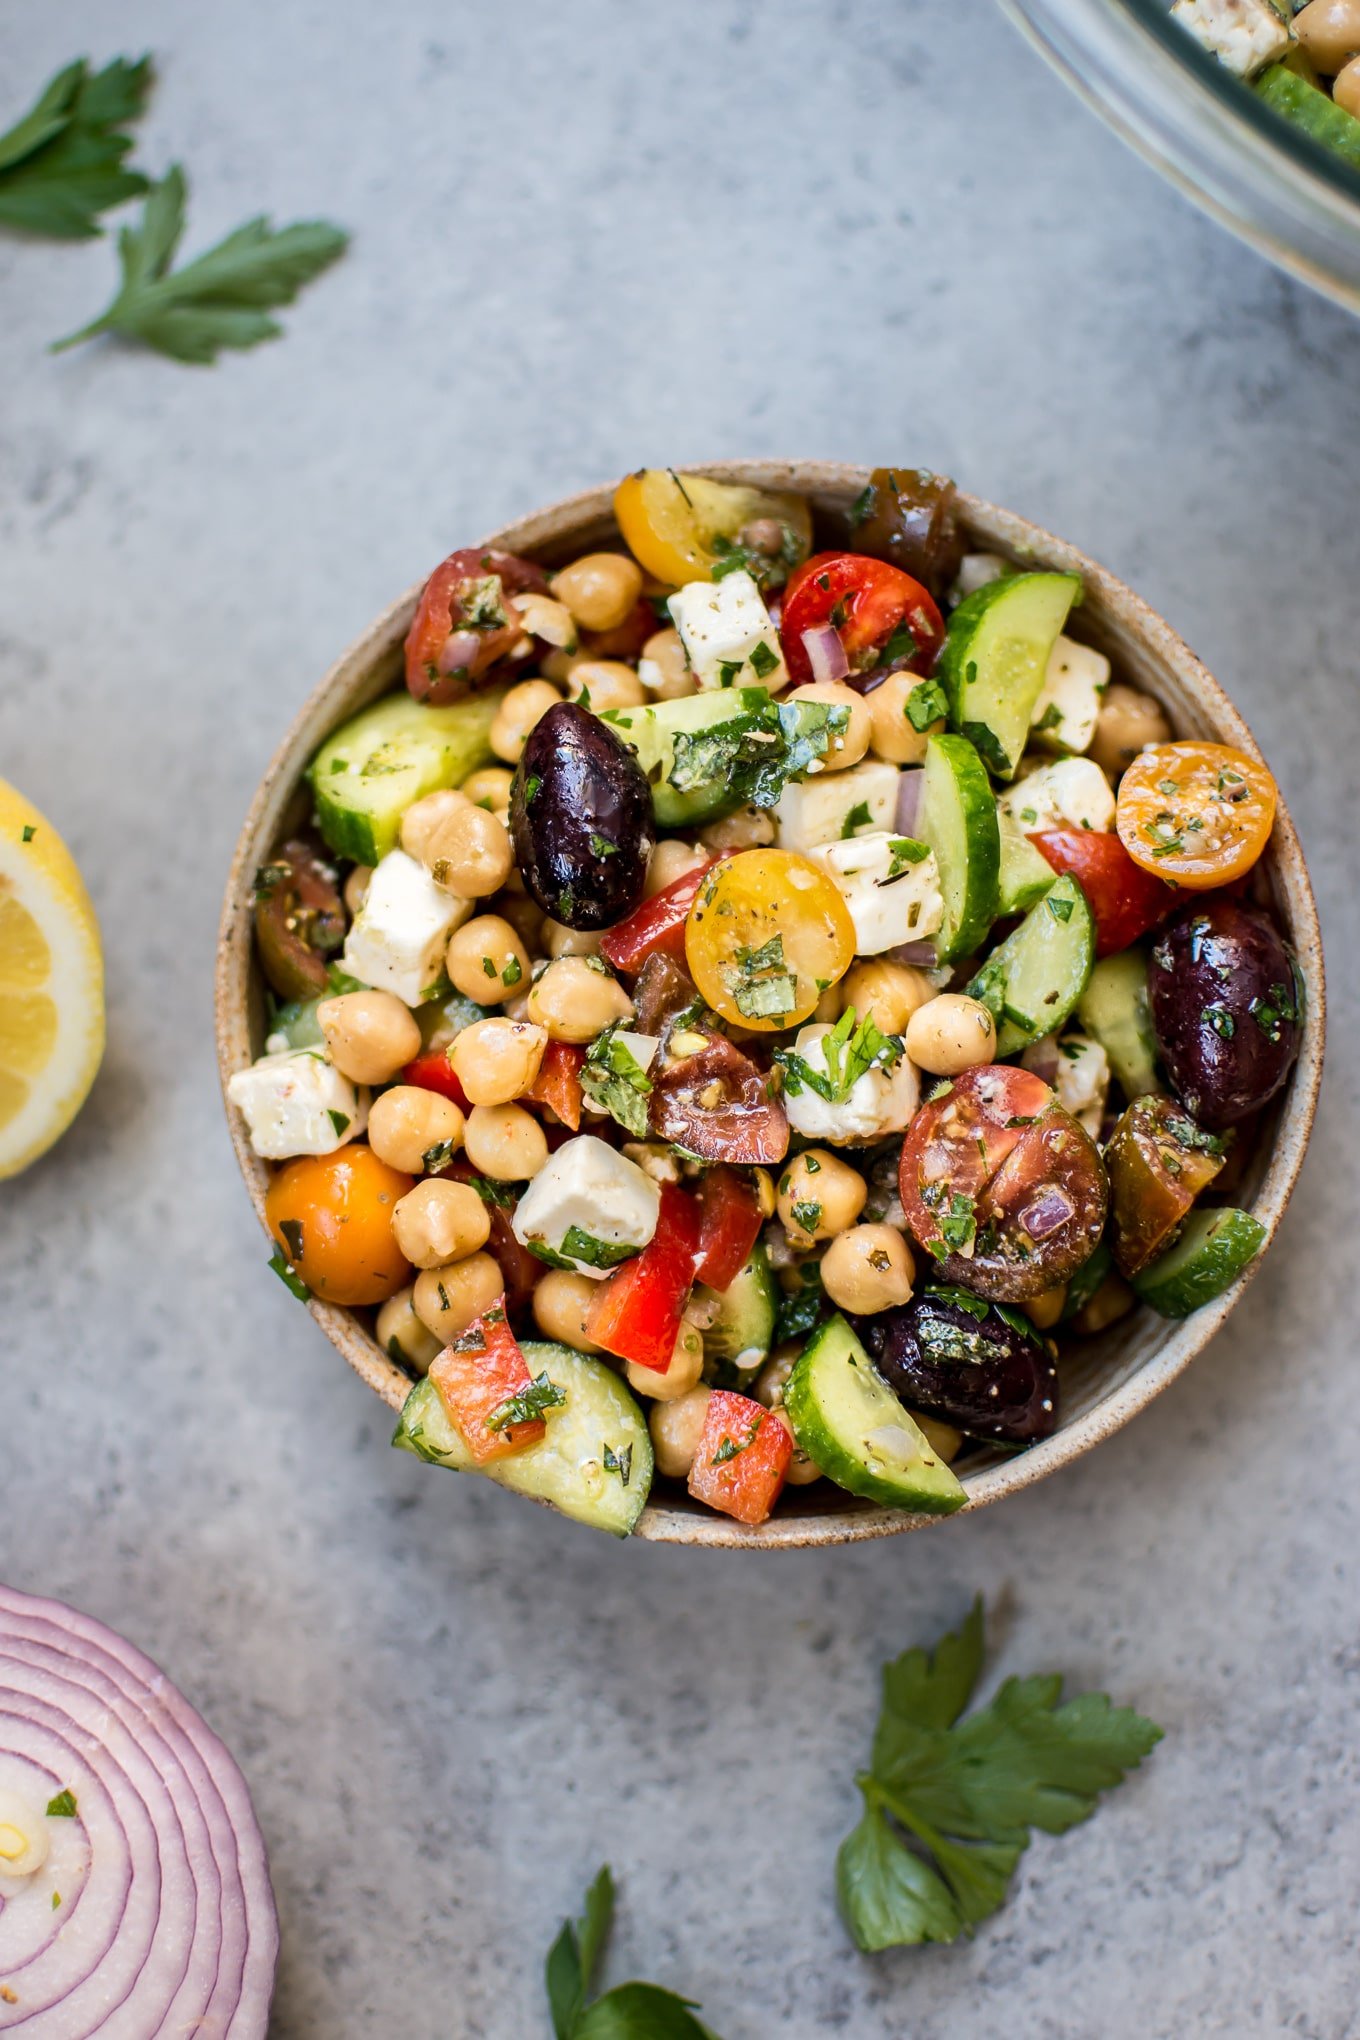 This Mediterranean chickpea salad has all the flavors of a classic Greek salad plus hearty chickpeas and fresh oregano and parsley for an extra pop of flavor. A wonderful light meal or side dish!